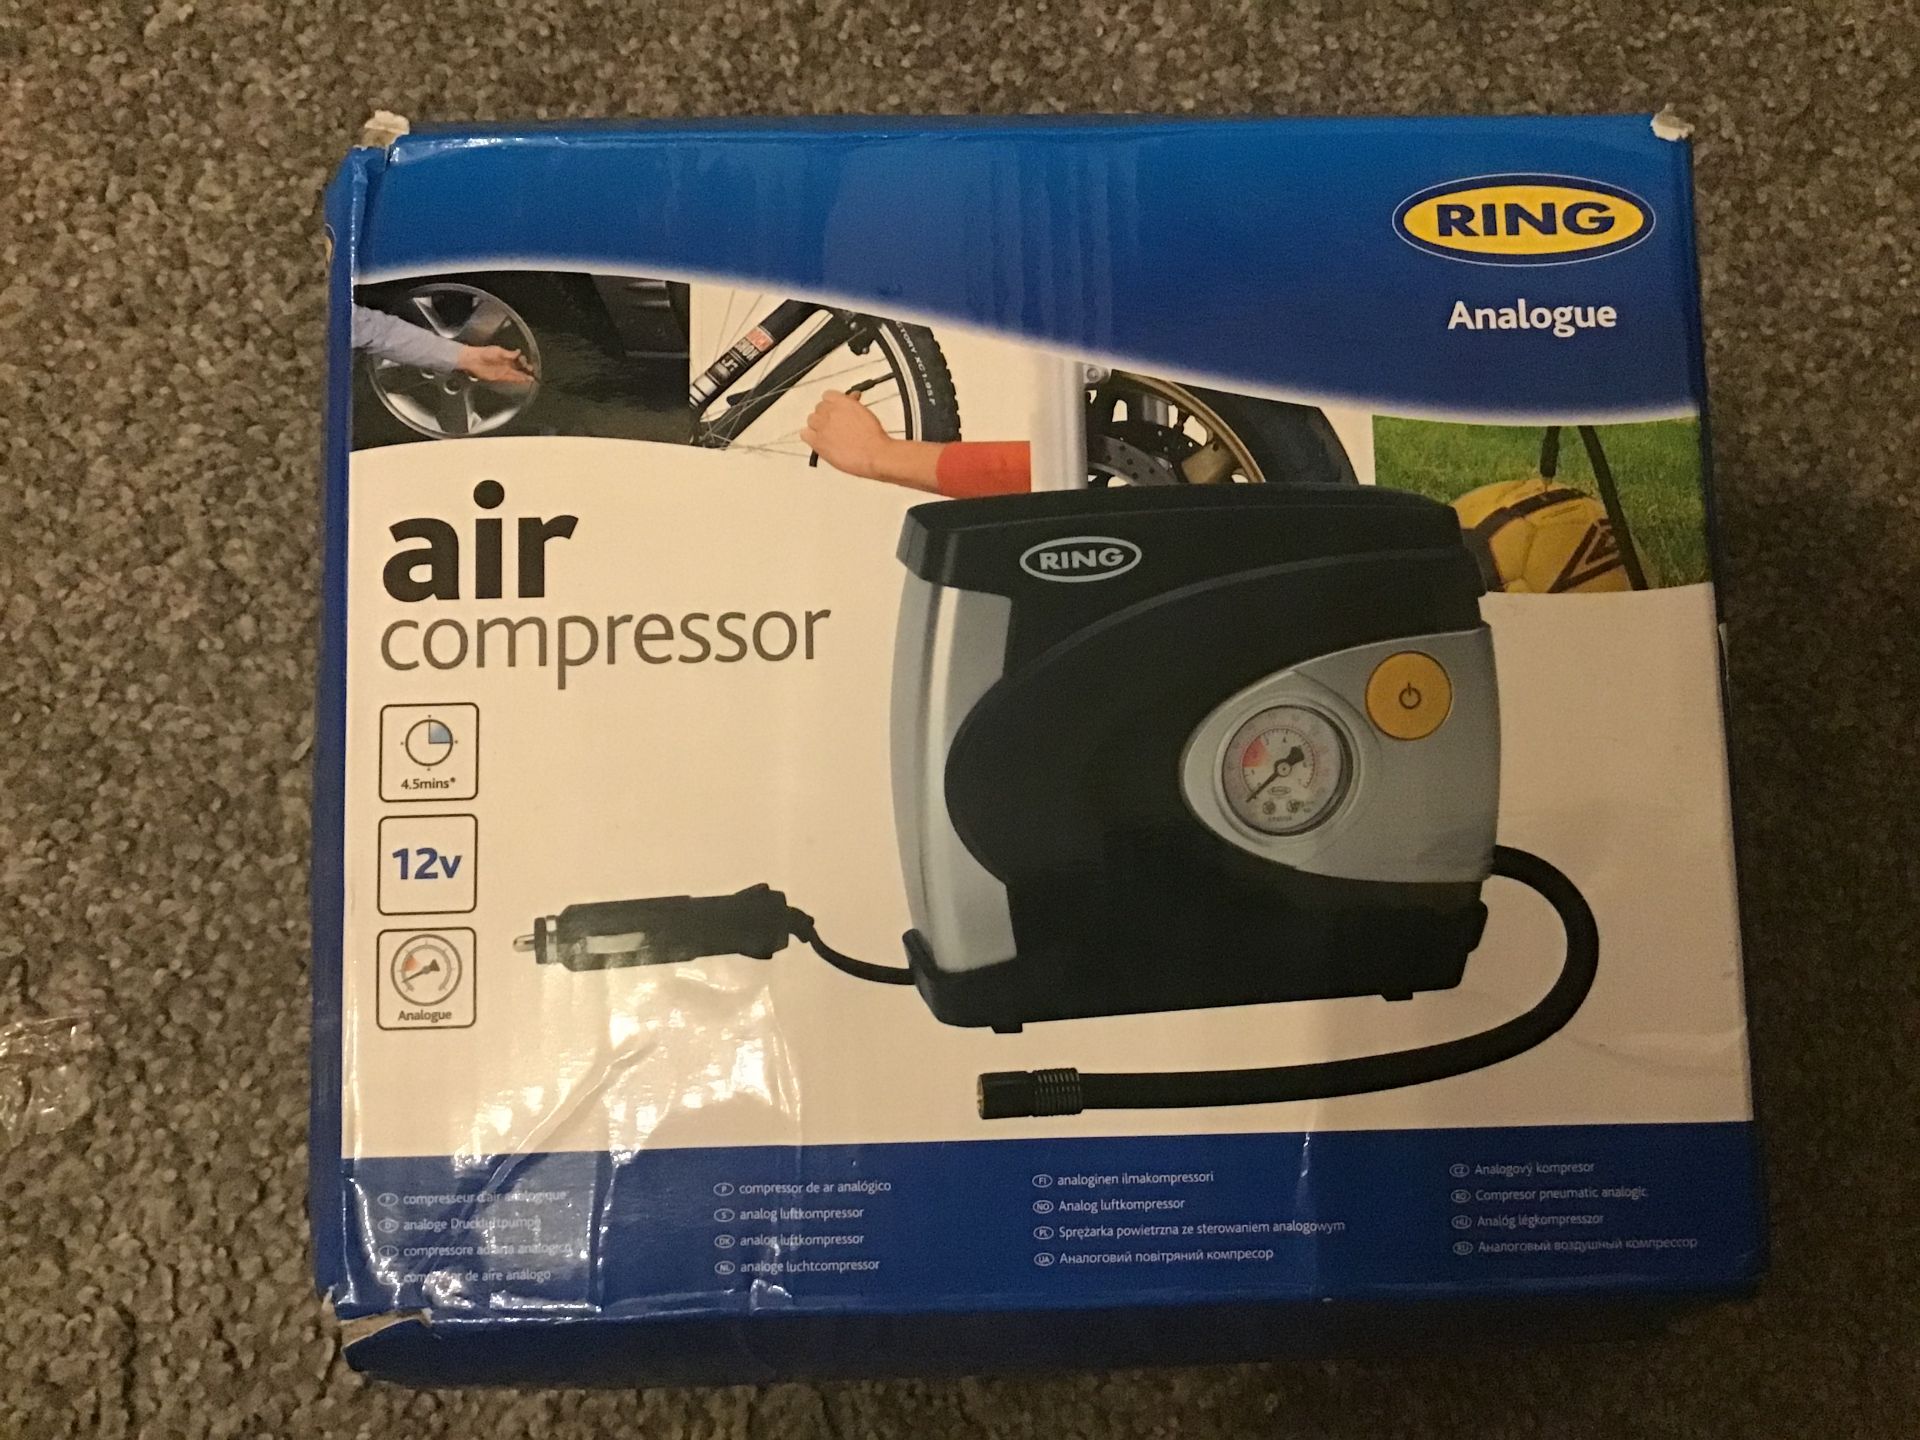 Ring analogue tyre air compressor